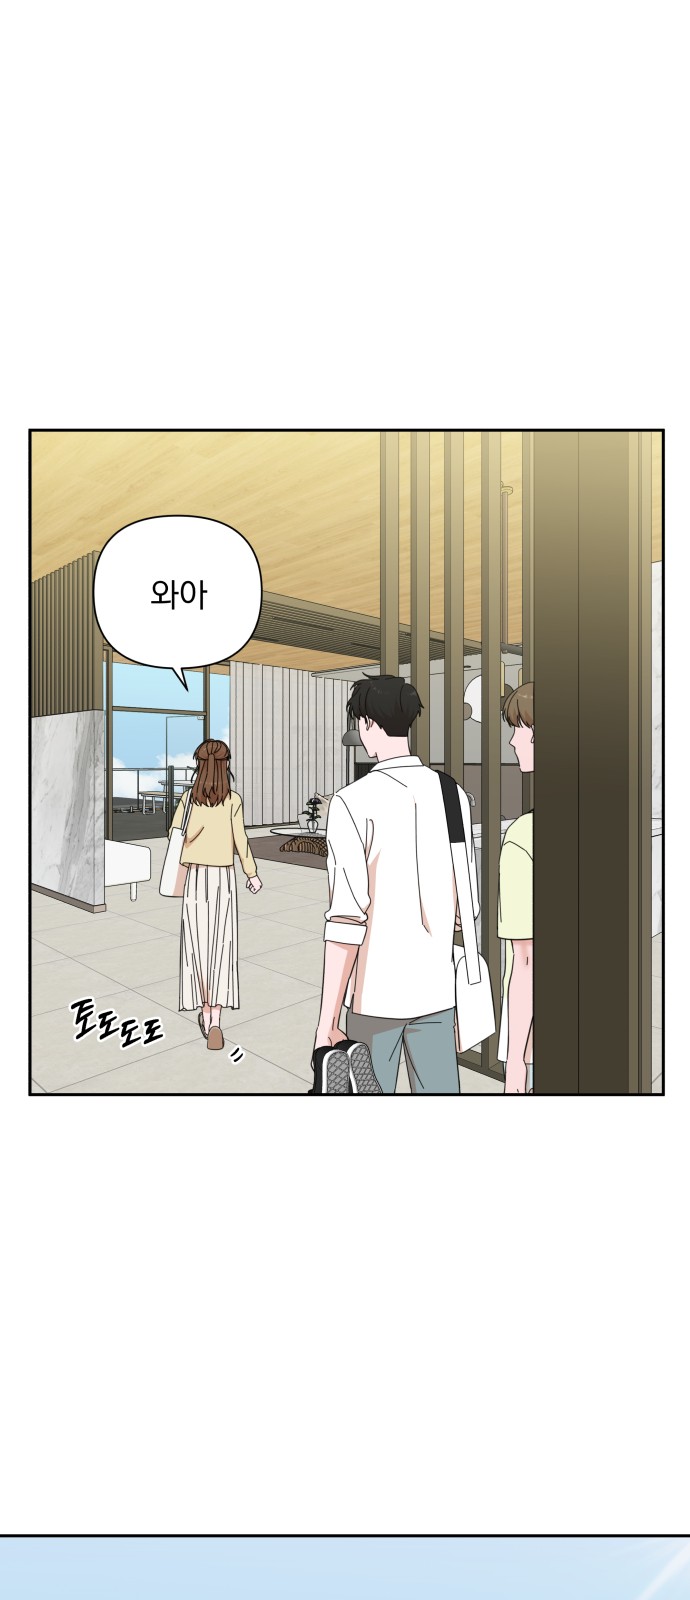 The Man With Pretty Lips - Chapter 22 - Page 2